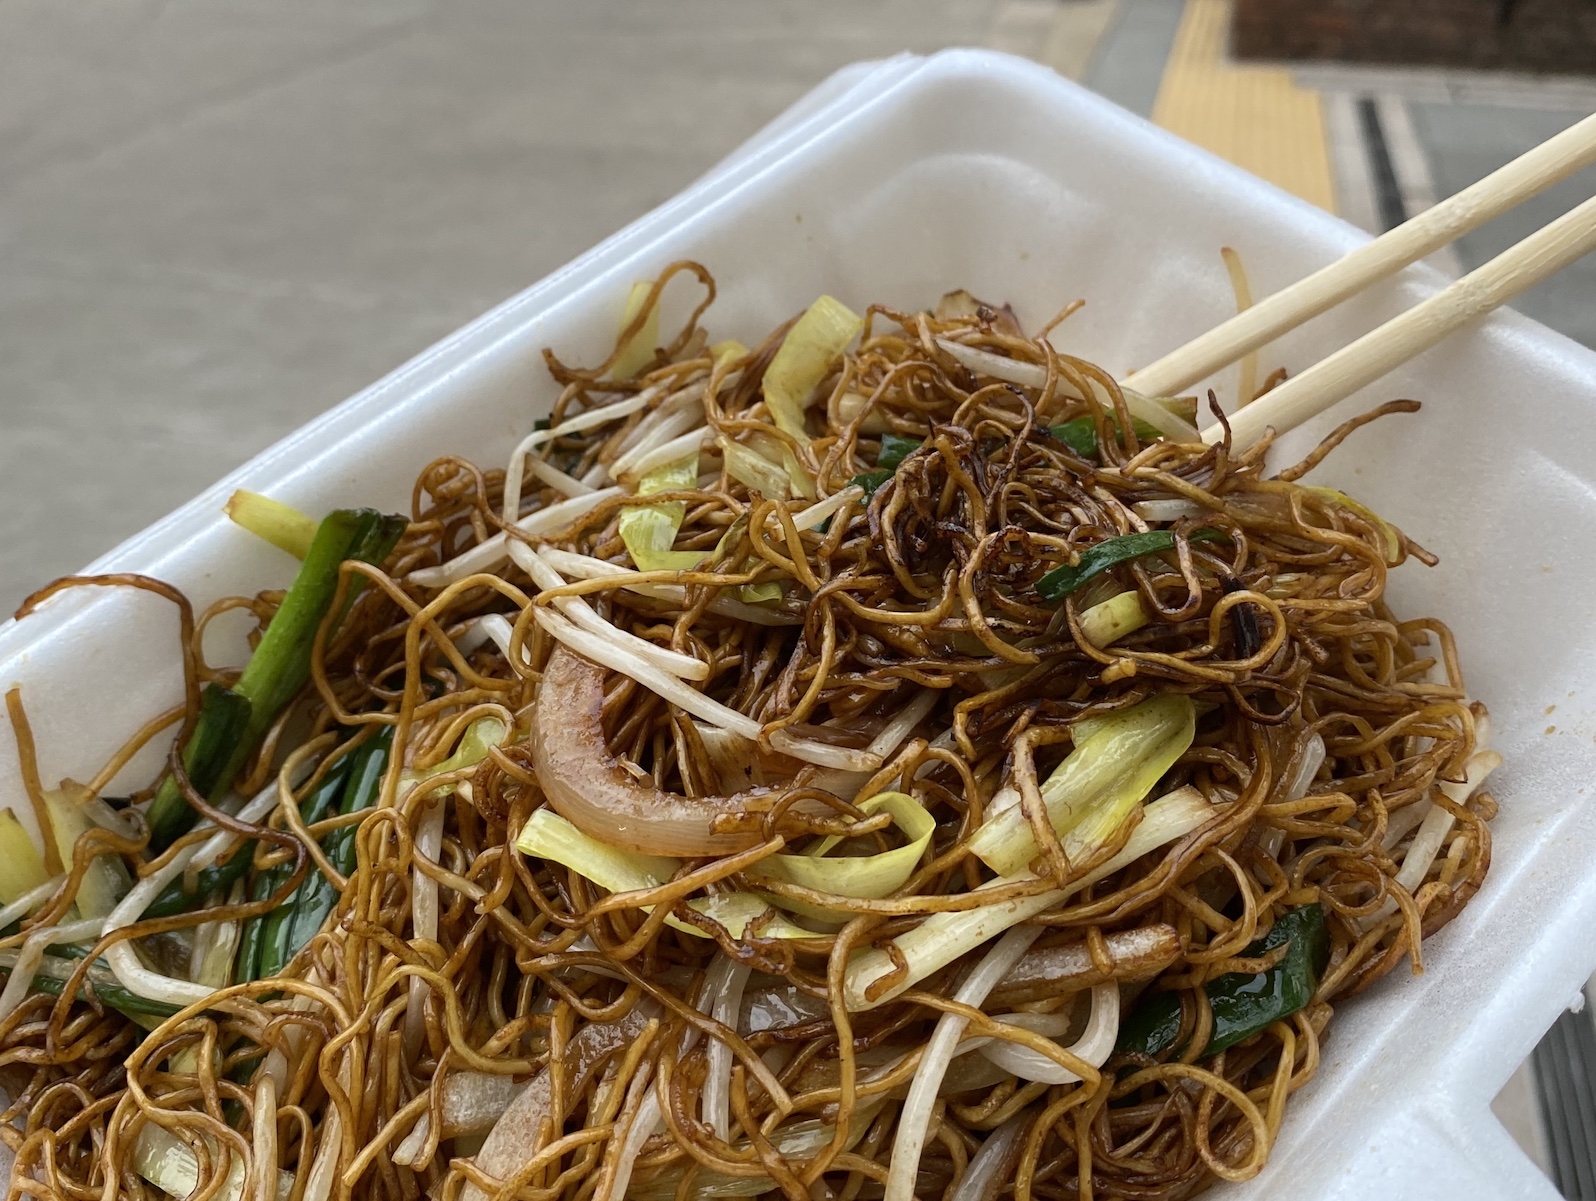 A white container filled with crispy blackened stir fry noodles